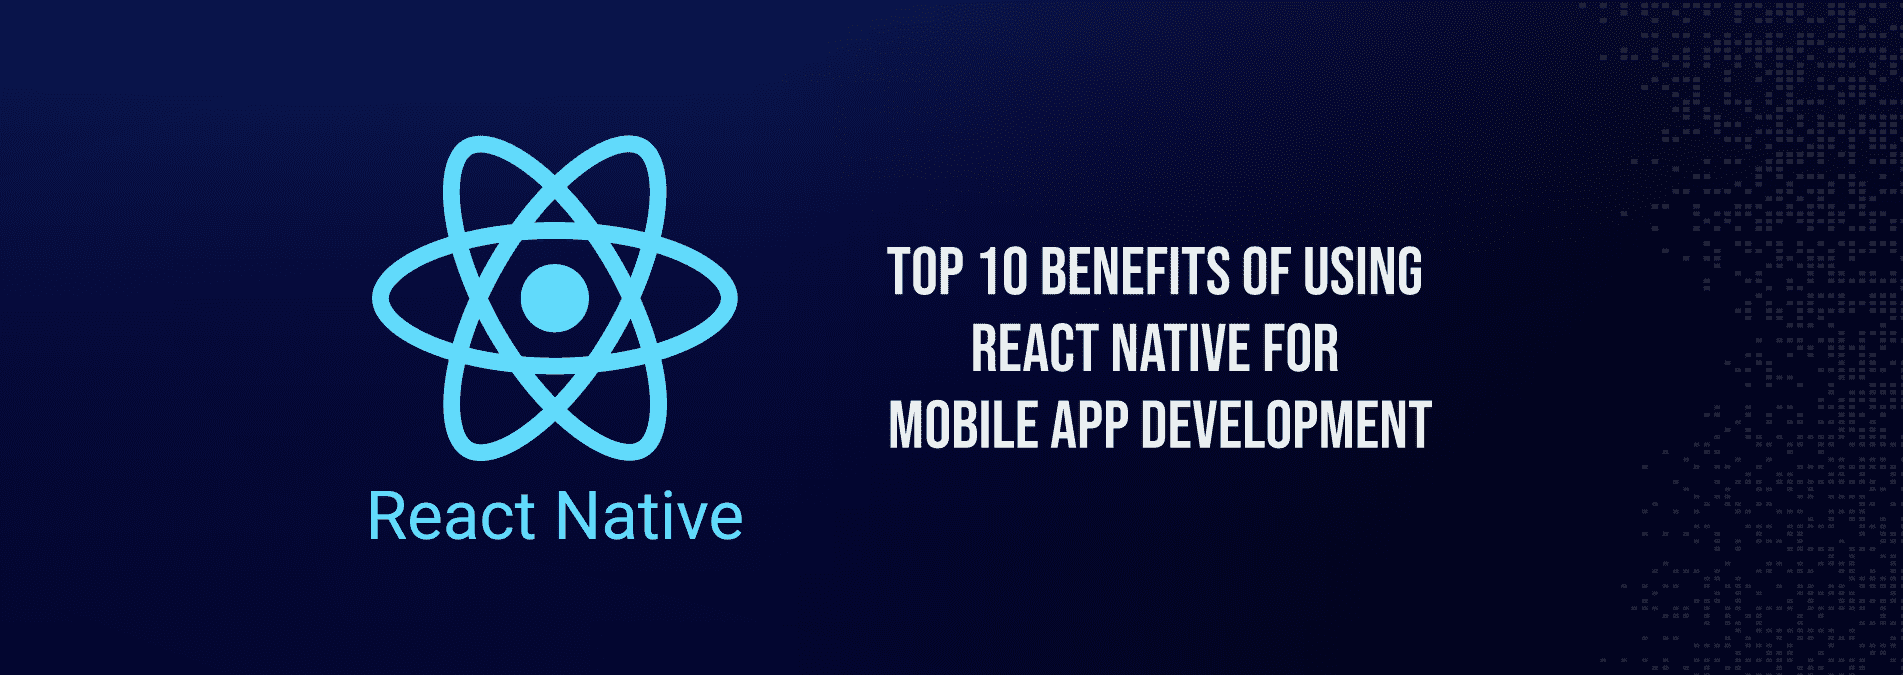 Top 10 Benefits of Using React Native For Mobile App Development